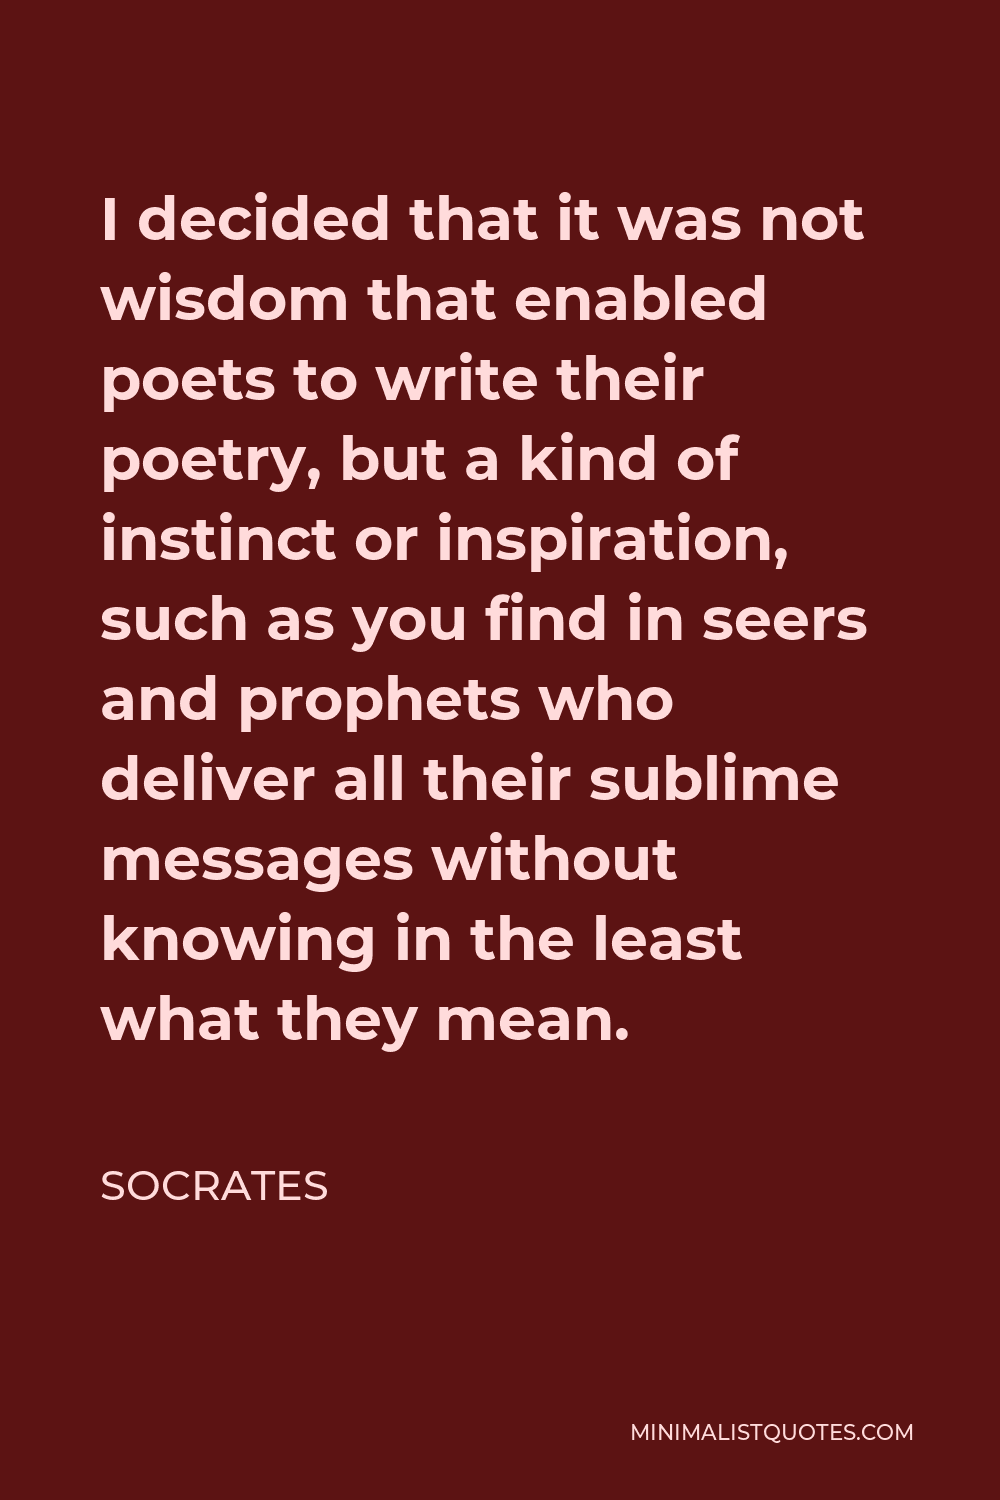 Socrates Quote - I decided that it was not wisdom that enabled poets to write their poetry, but a kind of instinct or inspiration, such as you find in seers and prophets who deliver all their sublime messages without knowing in the least what they mean.